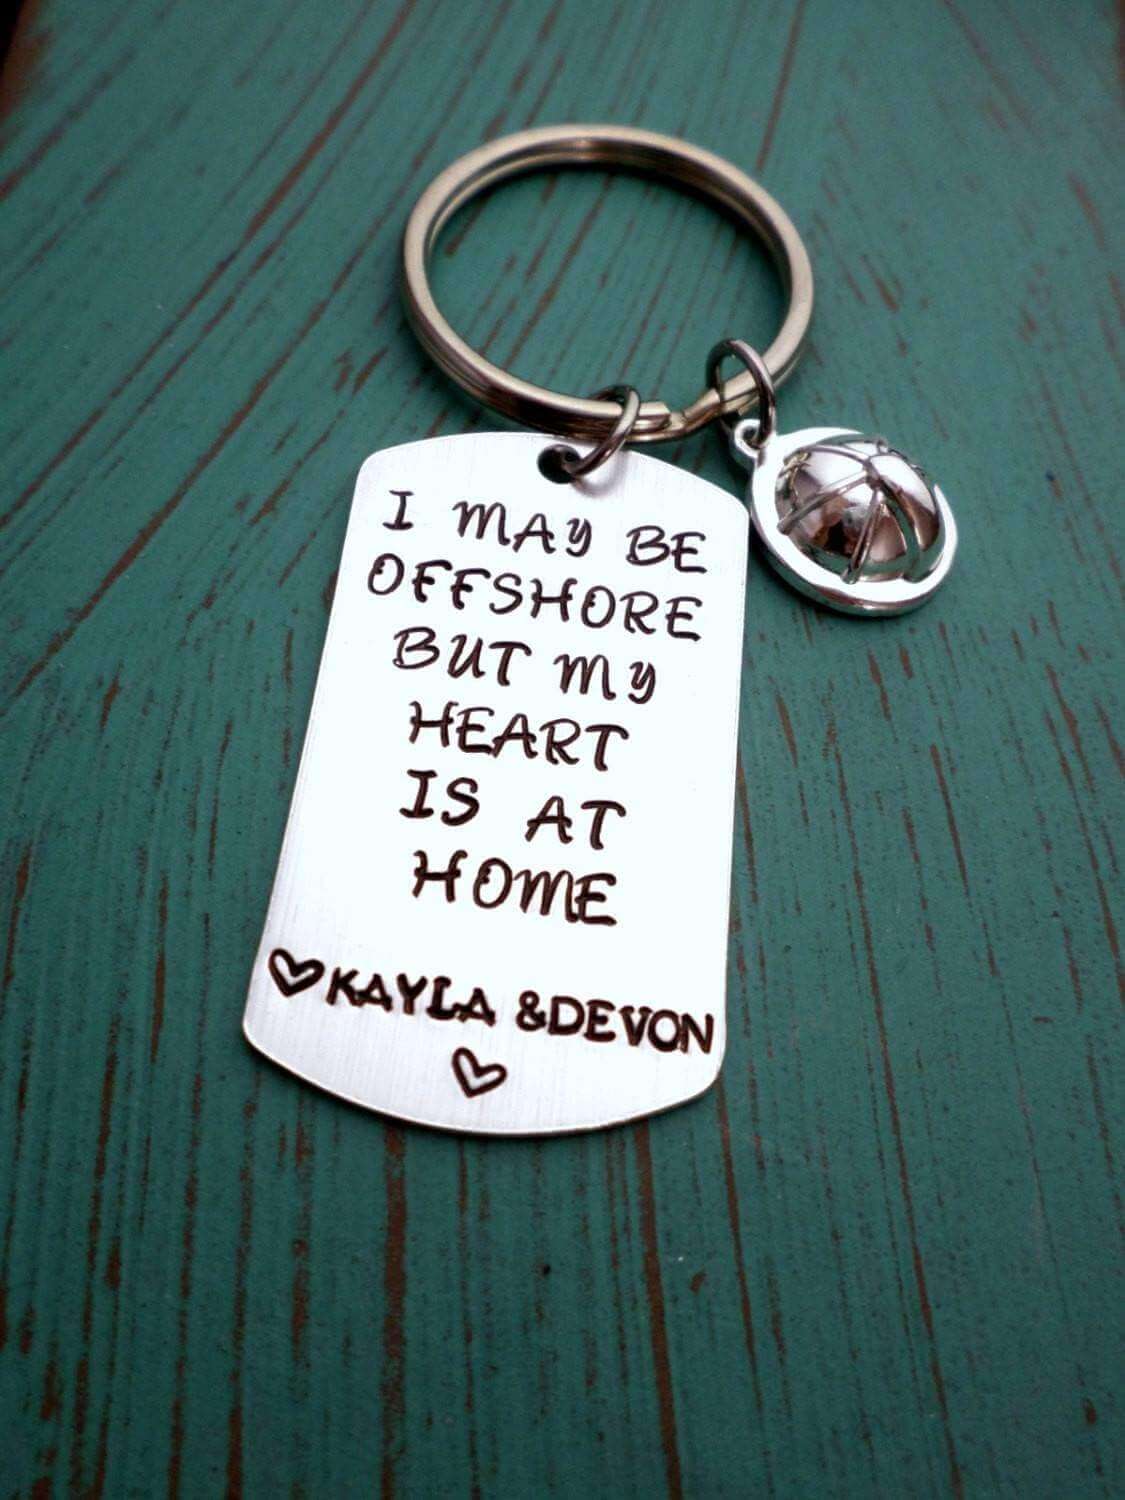 Offshore Keychain, Offshore Wife, Offshore Girlfriend, Gift for Oil Field Men, Offshore Worker, Keychains, HandmadeLoveStories, HandmadeLoveStories , [Handmade_Love_Stories], [Hand_Stamped_Jewelry], [Etsy_Stamped_Jewelry], [Etsy_Jewelry]